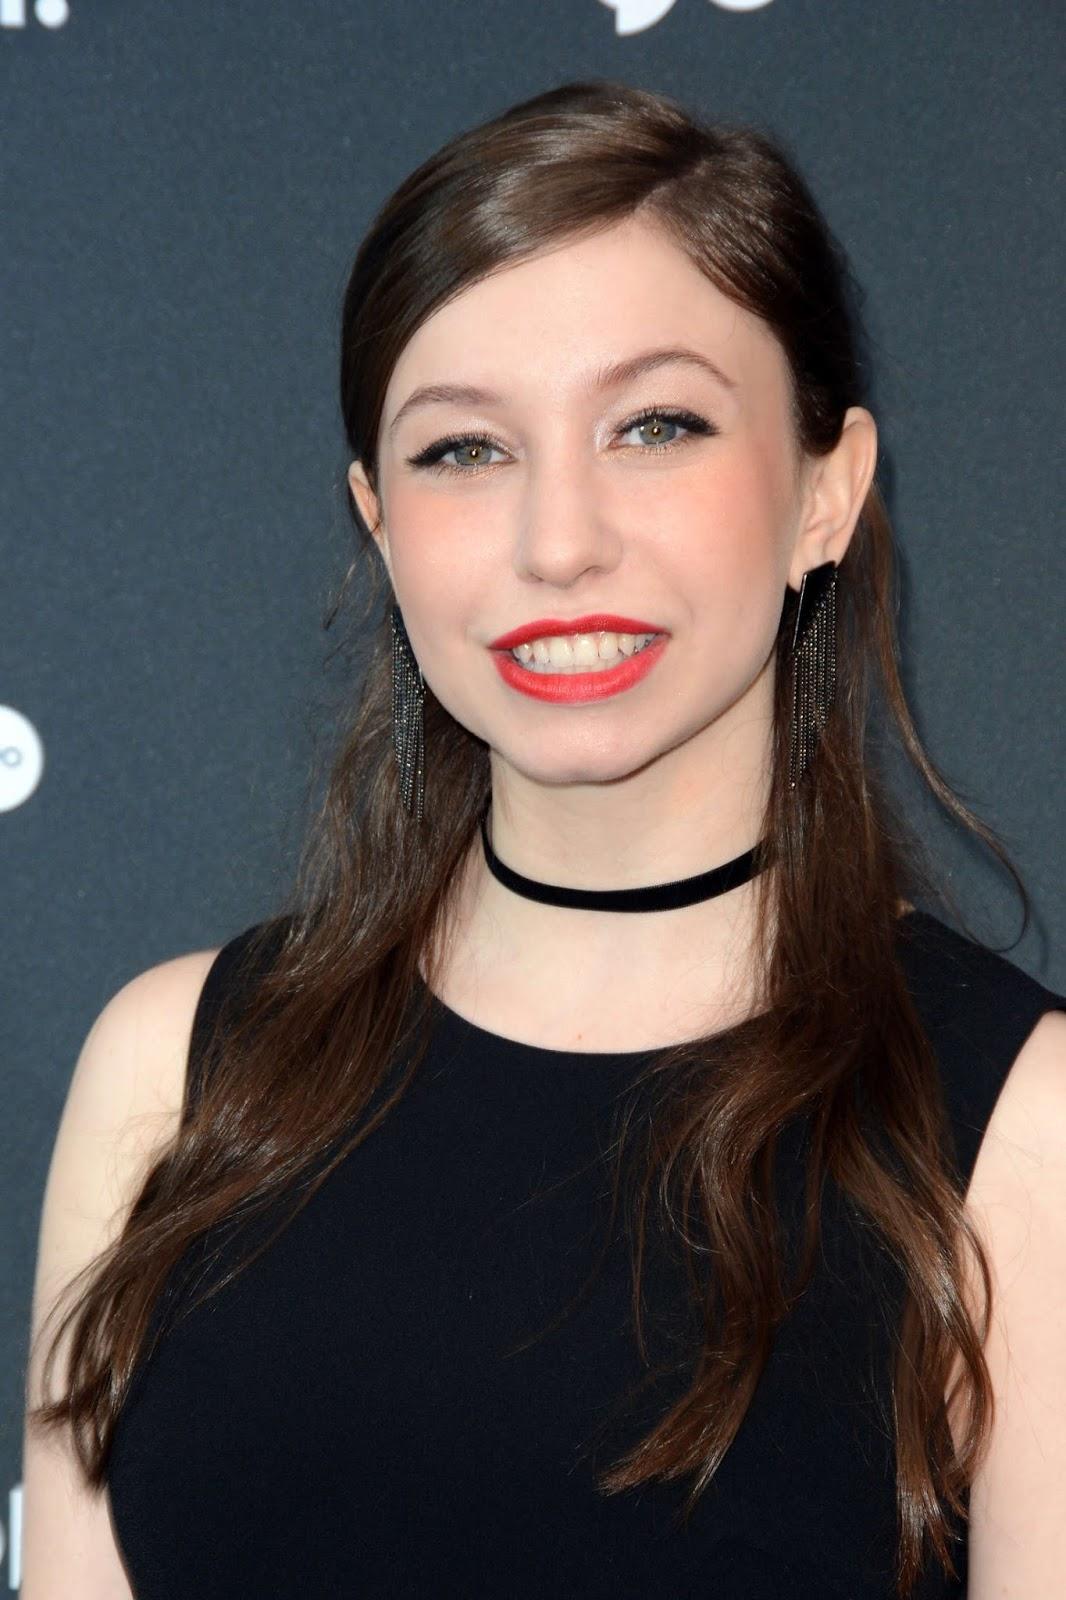 70+ Hot Pictures Of Katelyn Nacon Which Are Sure to Catch Your Attention 233